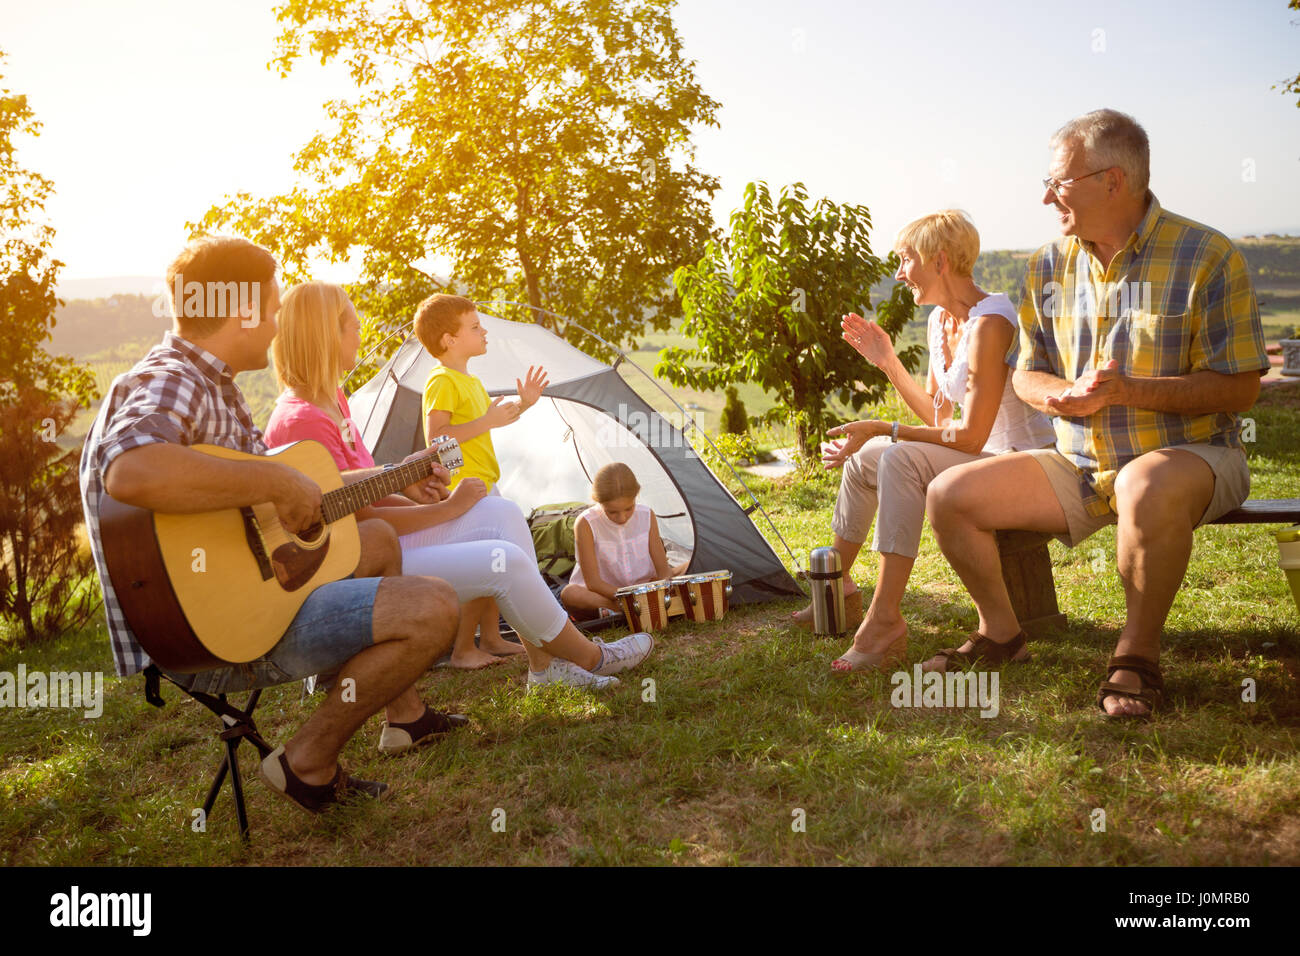 Family enjoying camping holiday in countryside Stock Photo